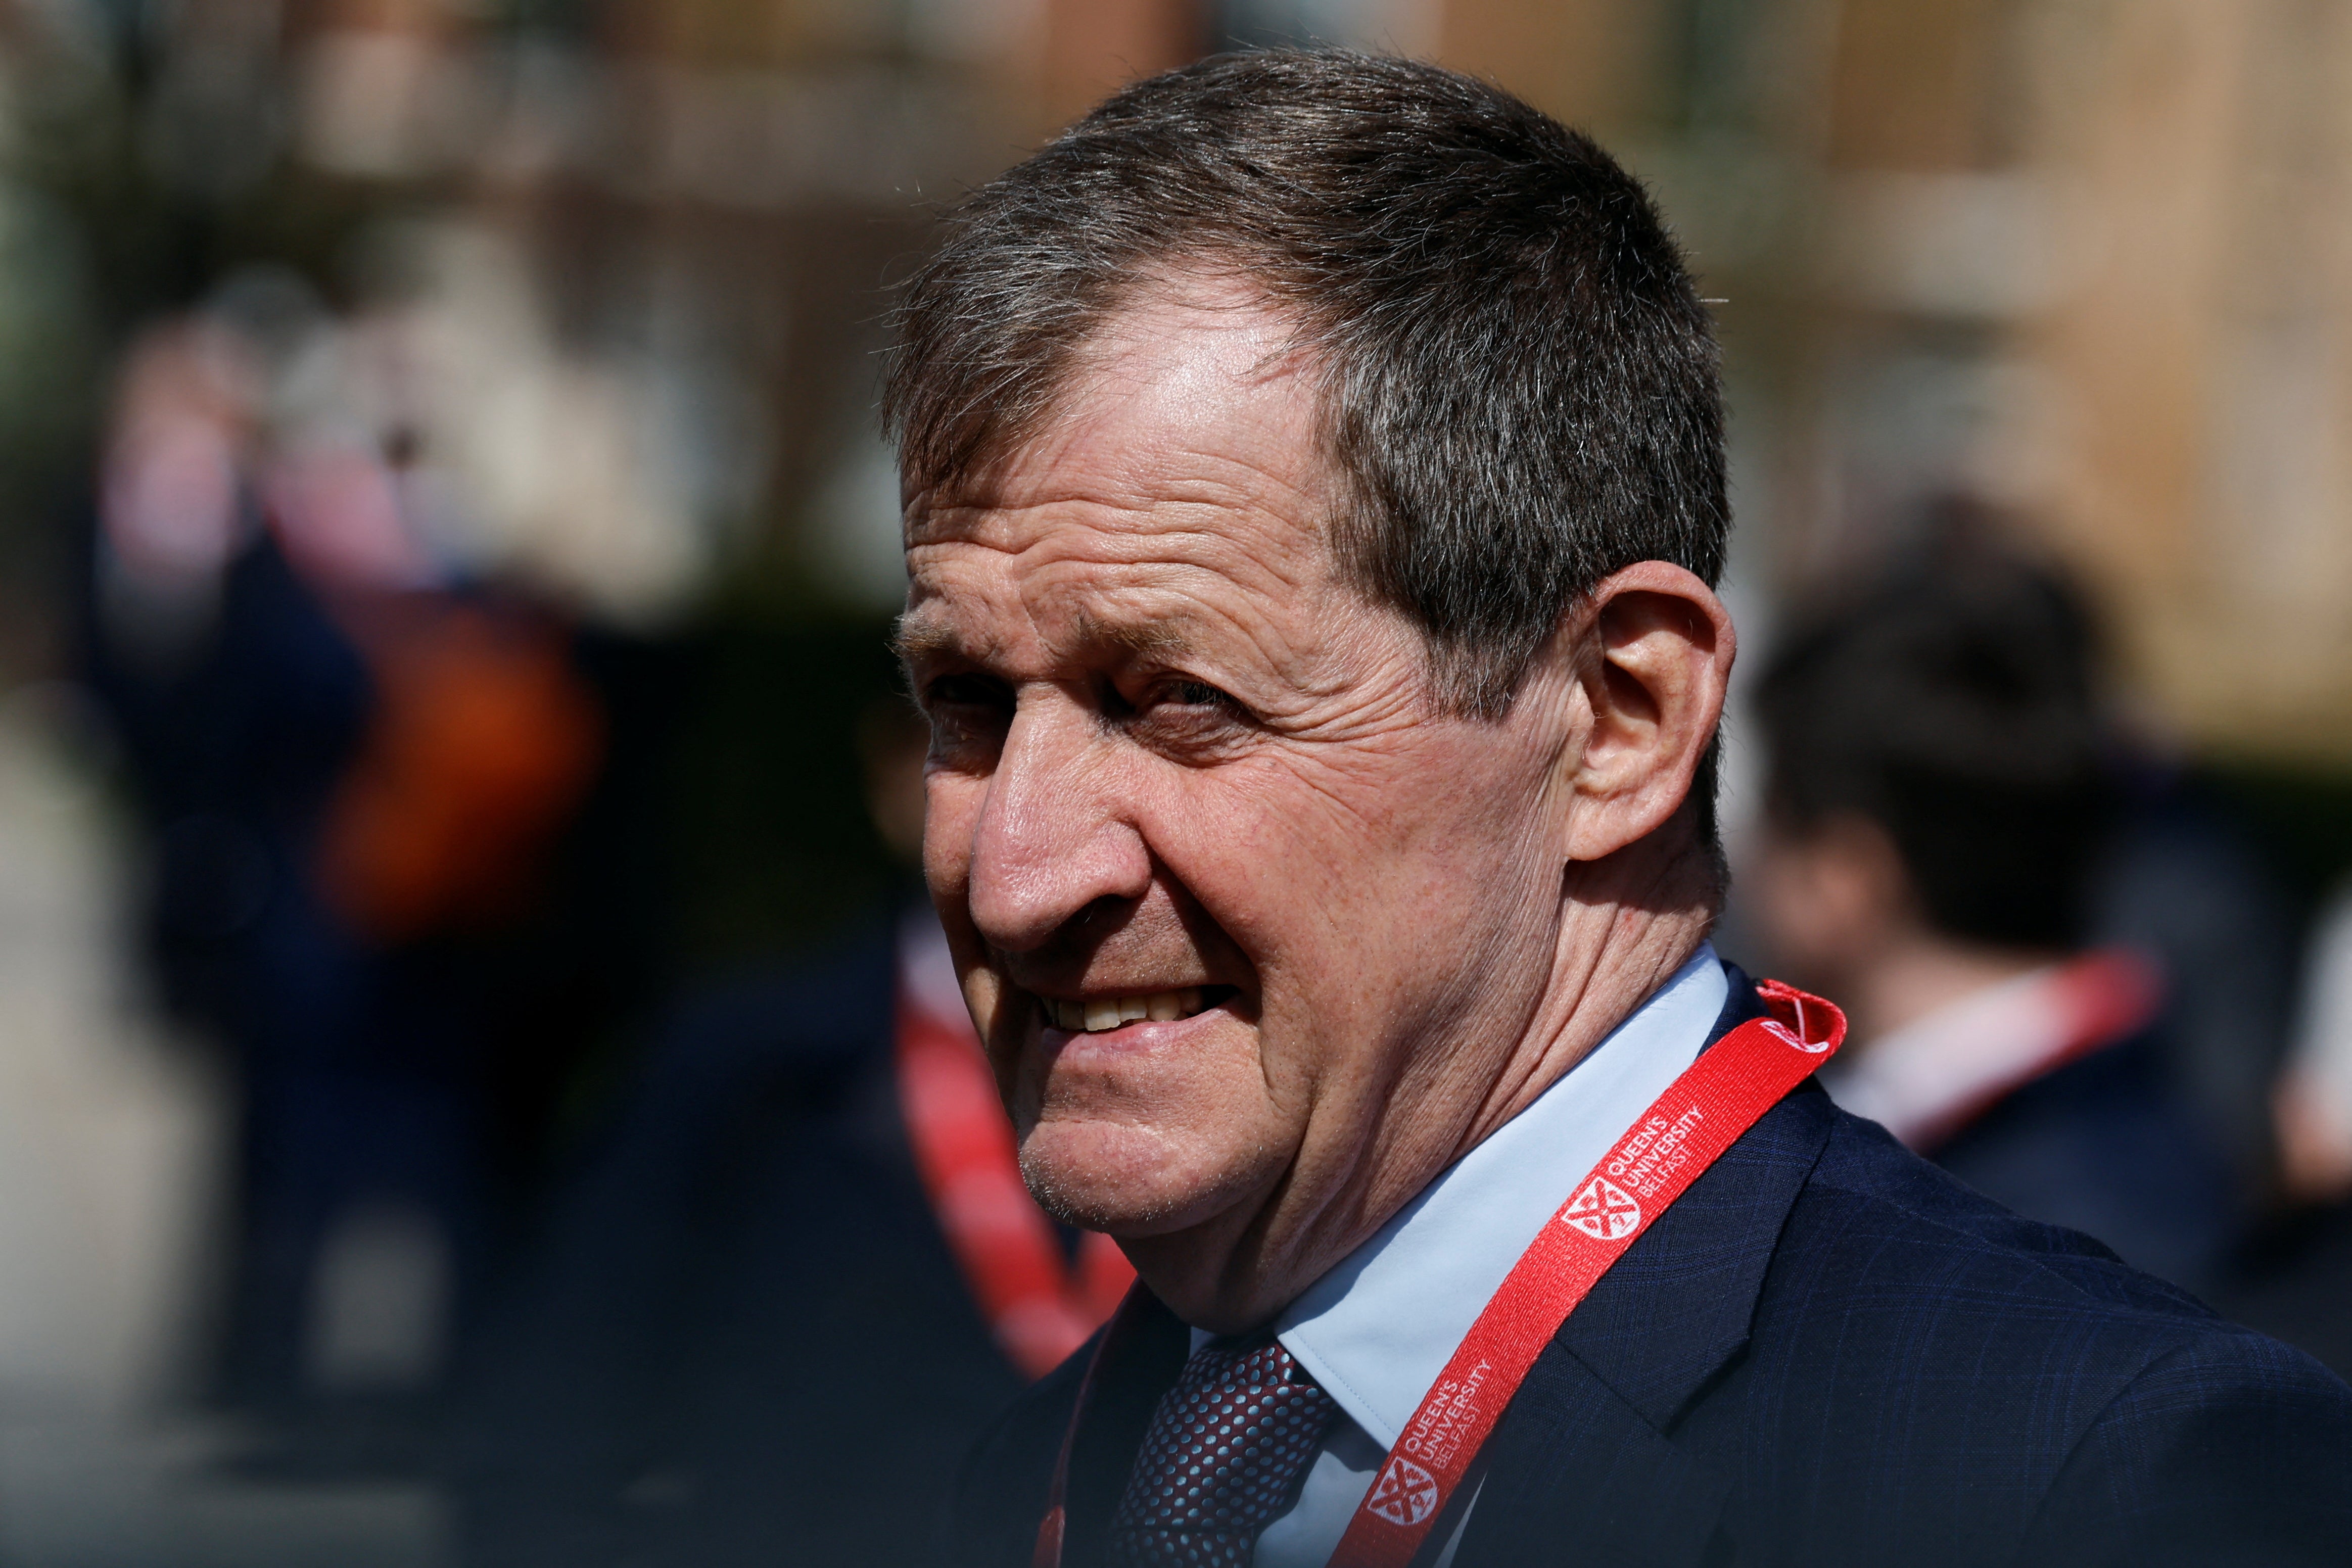 Former Number 10 communications chief Alastair Campbell